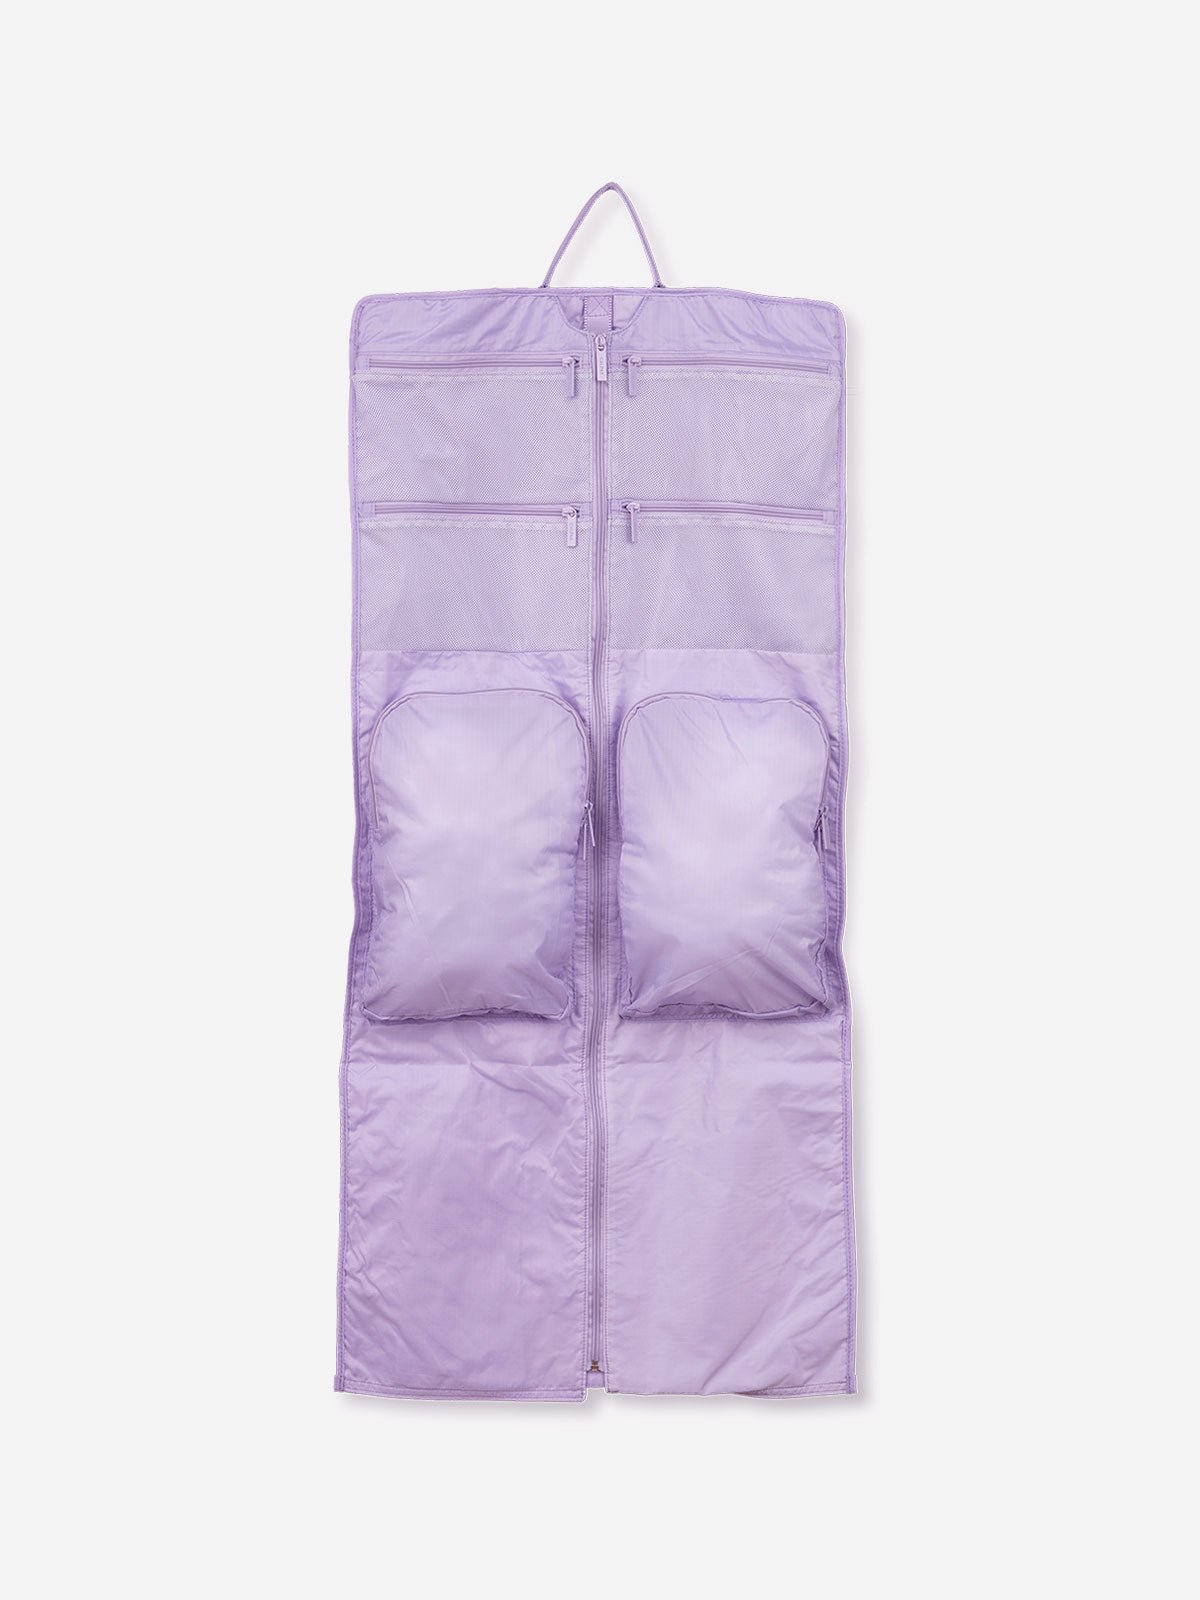 CALPAK Compakt small carry on garment bag made with water resistant ripstop nylon and multiple pockets in orchid